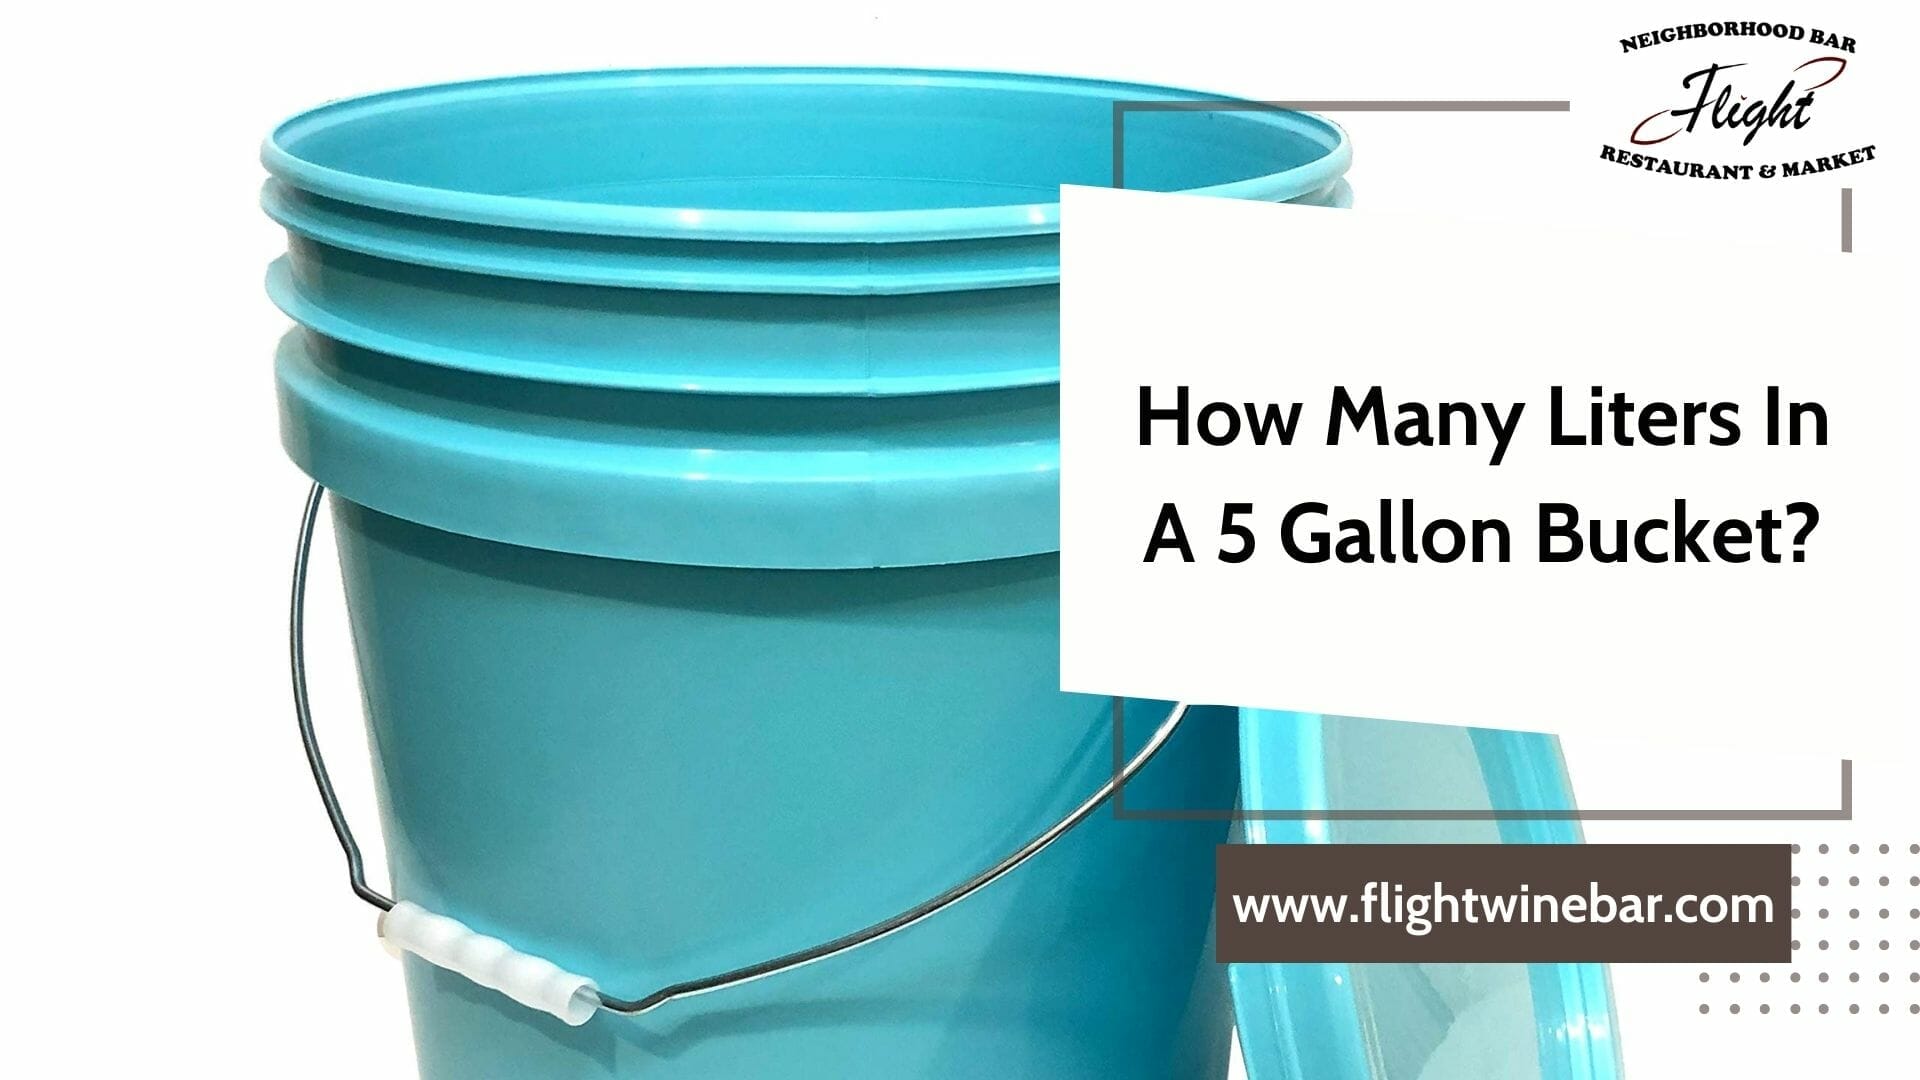 How Many Liters In A 5 Gallon Bucket